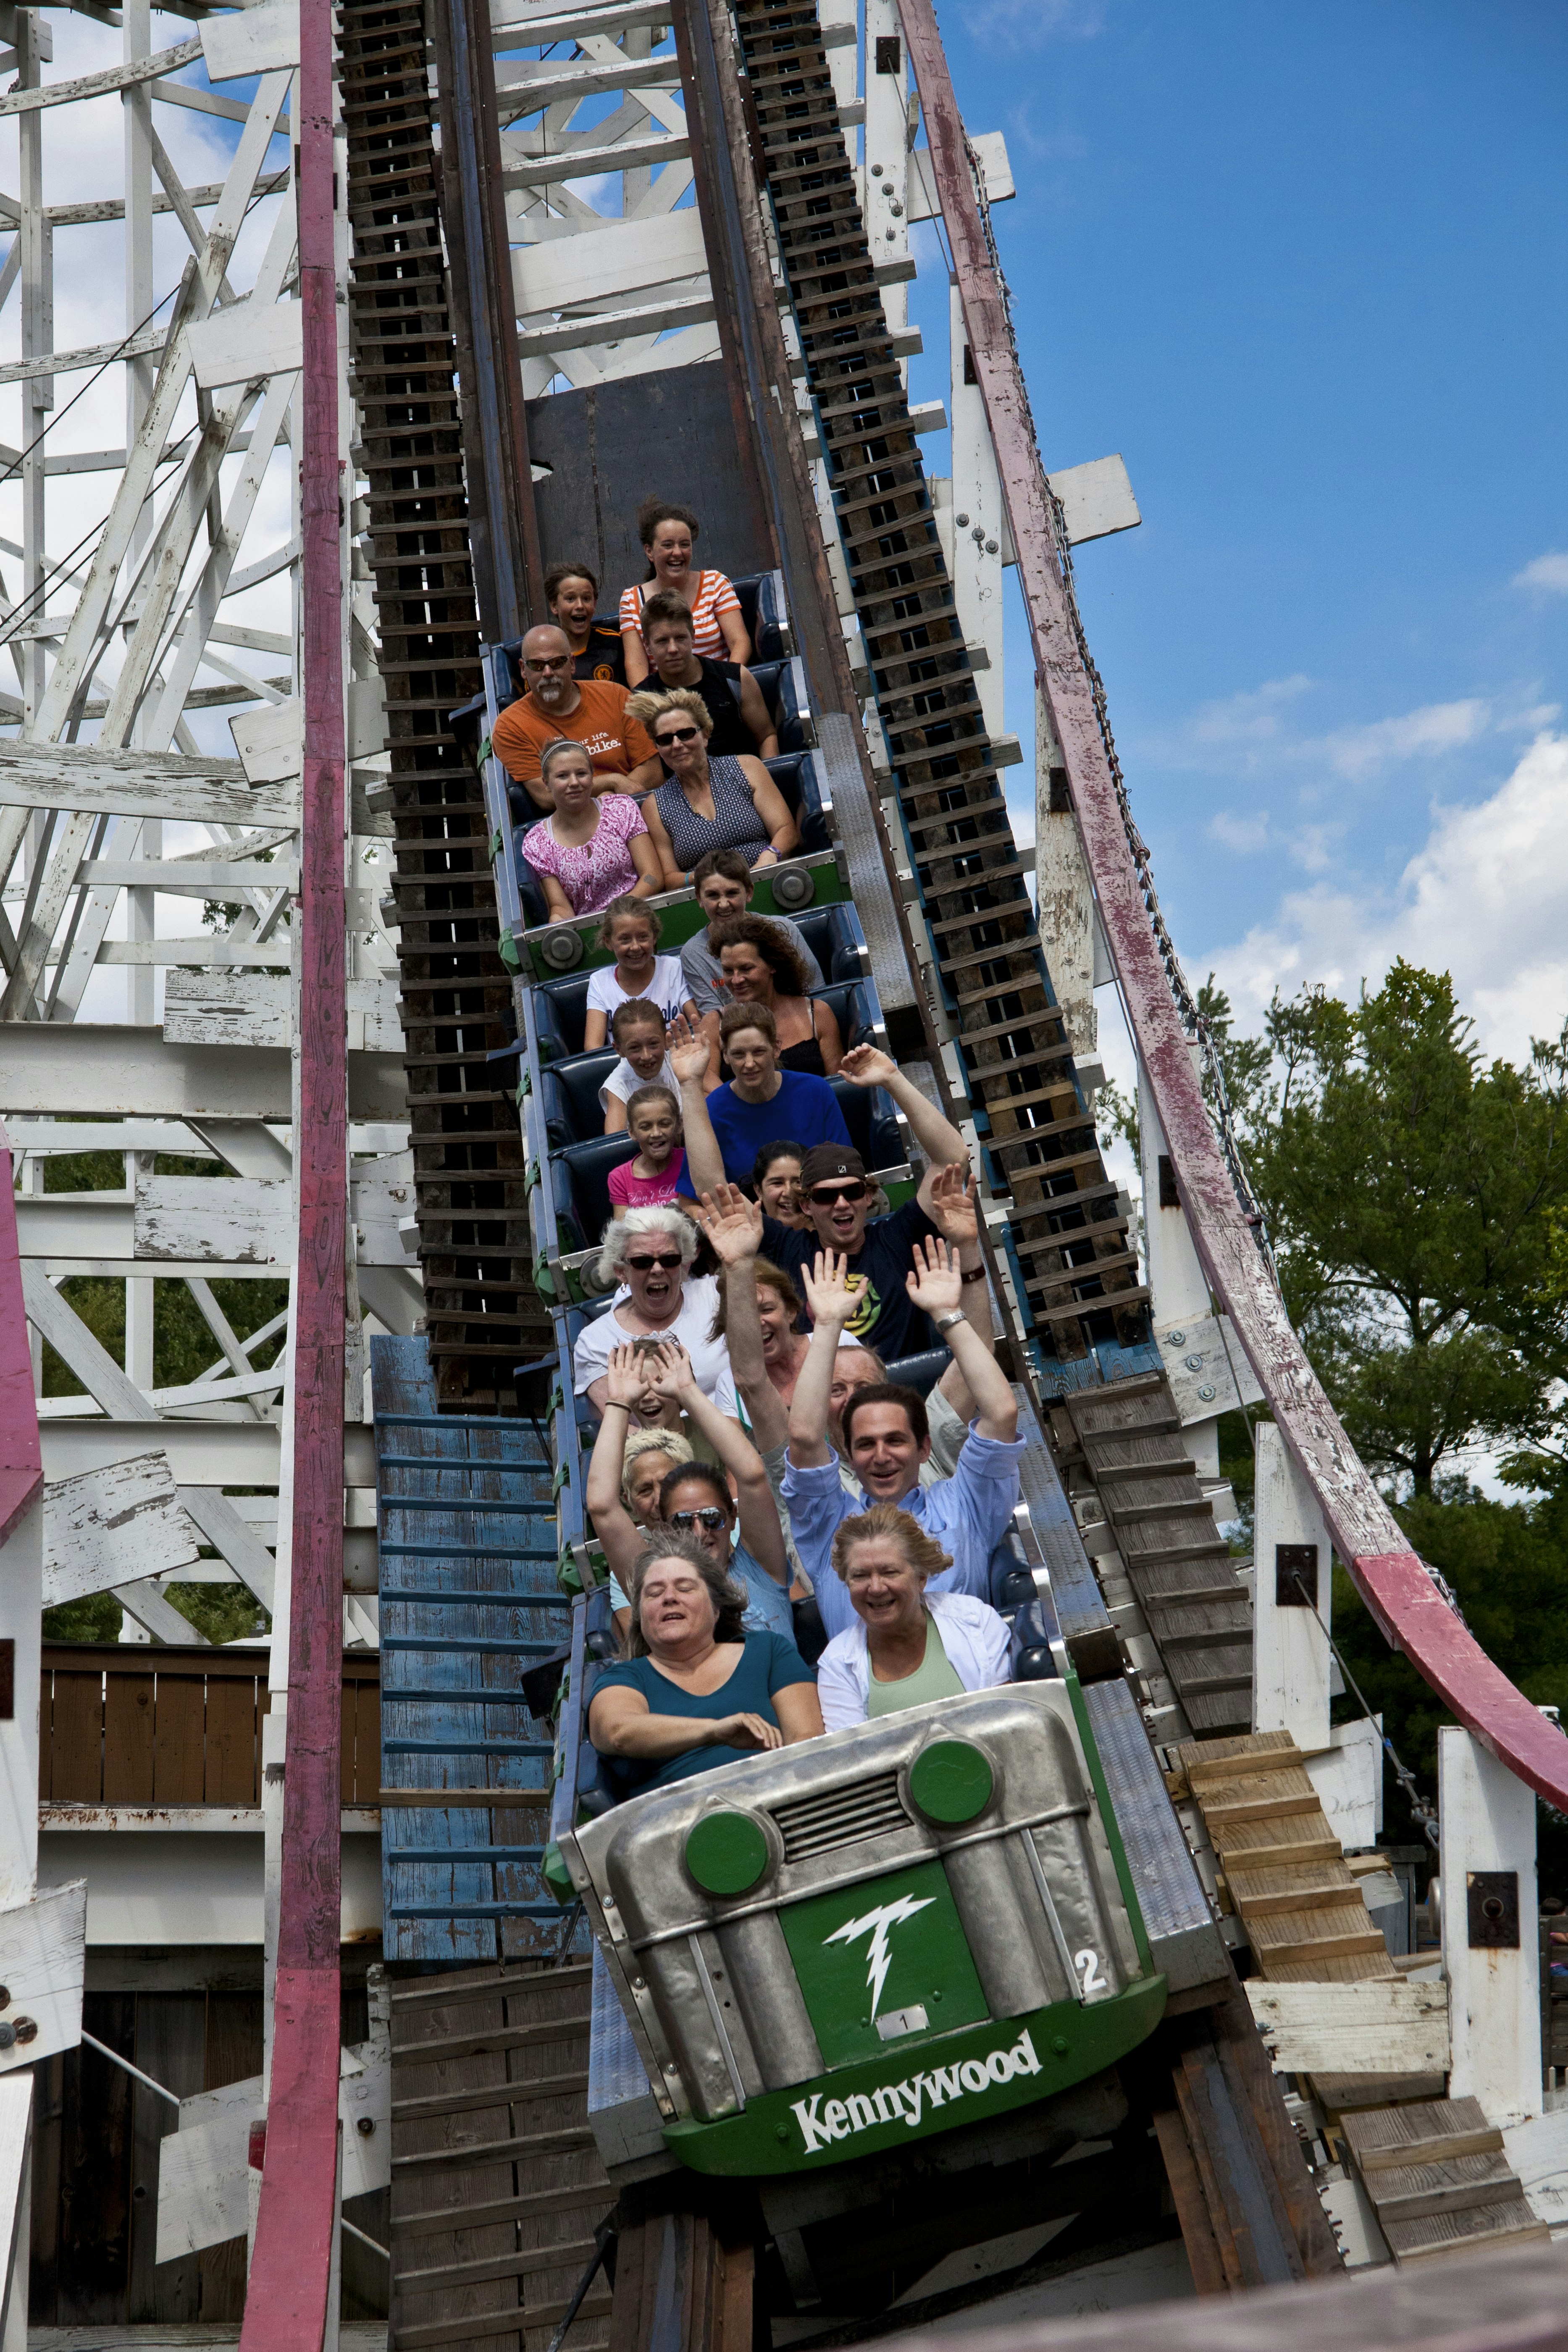 A group of people scream on a wooden roller coaster at Kennywood Amusement Park in Pittsburgh